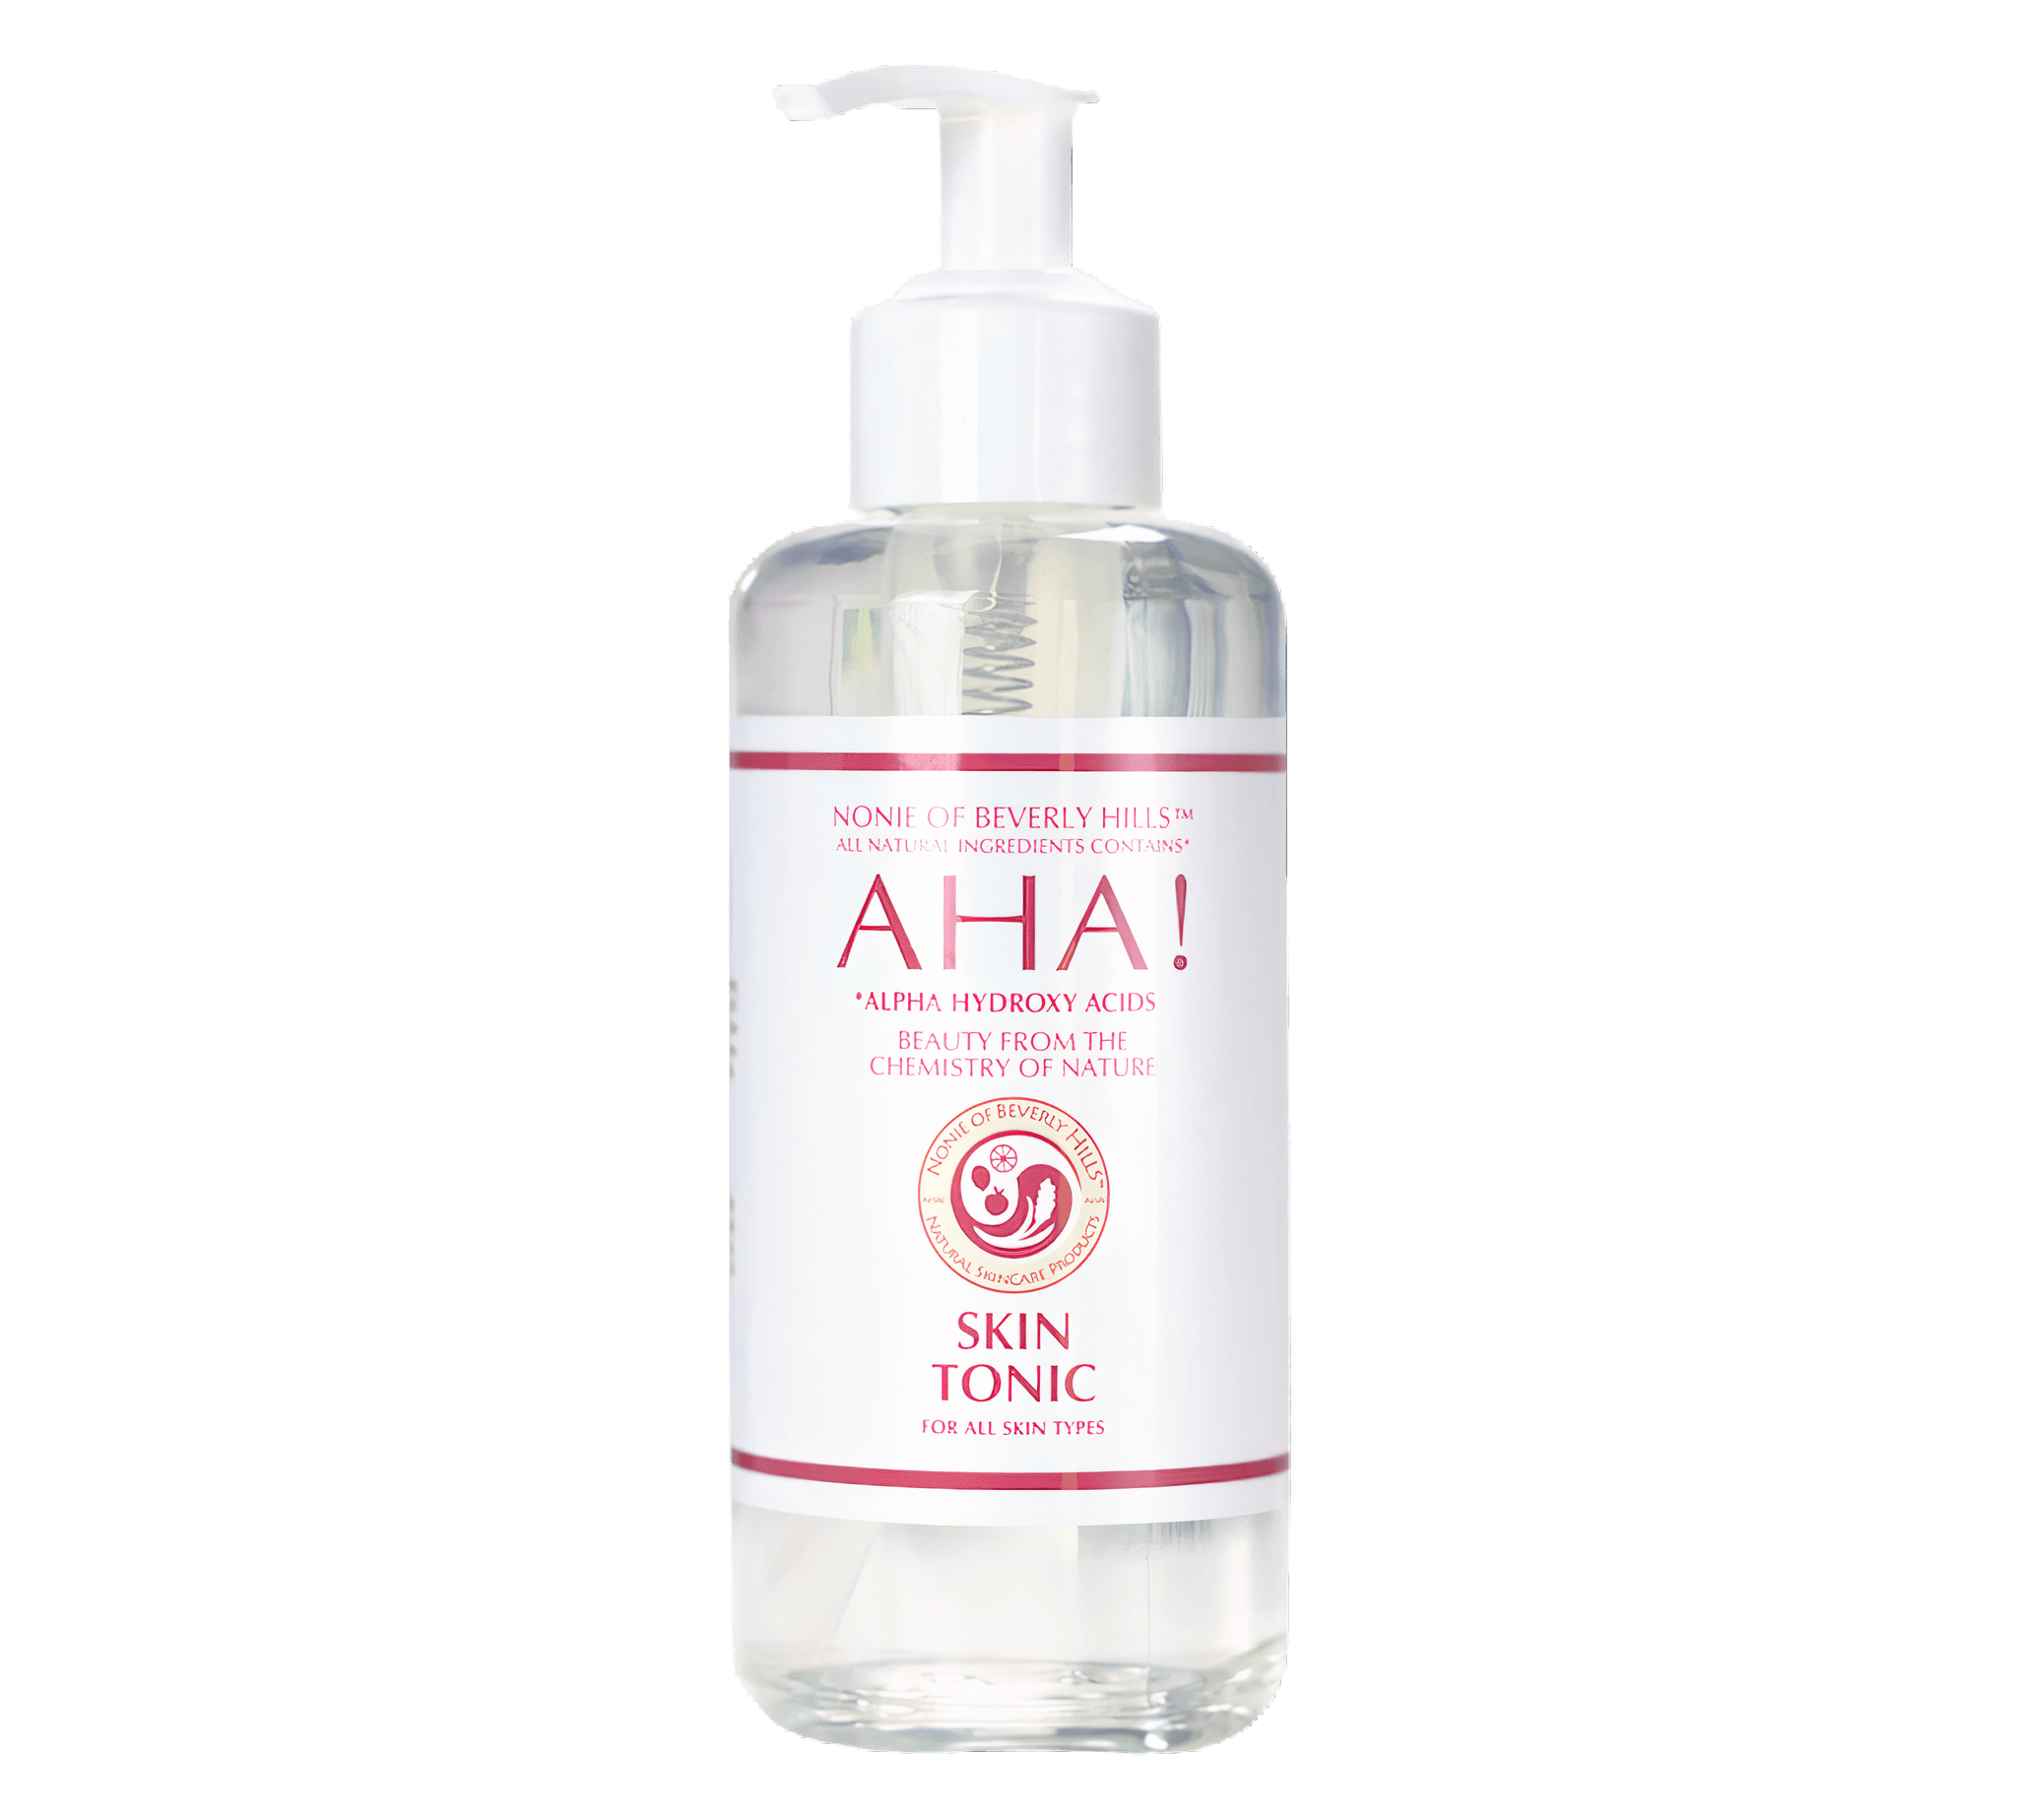 AHA! Skin Tonic 7.0 oz - for All Skin Types - Nonie of Beverly Hills